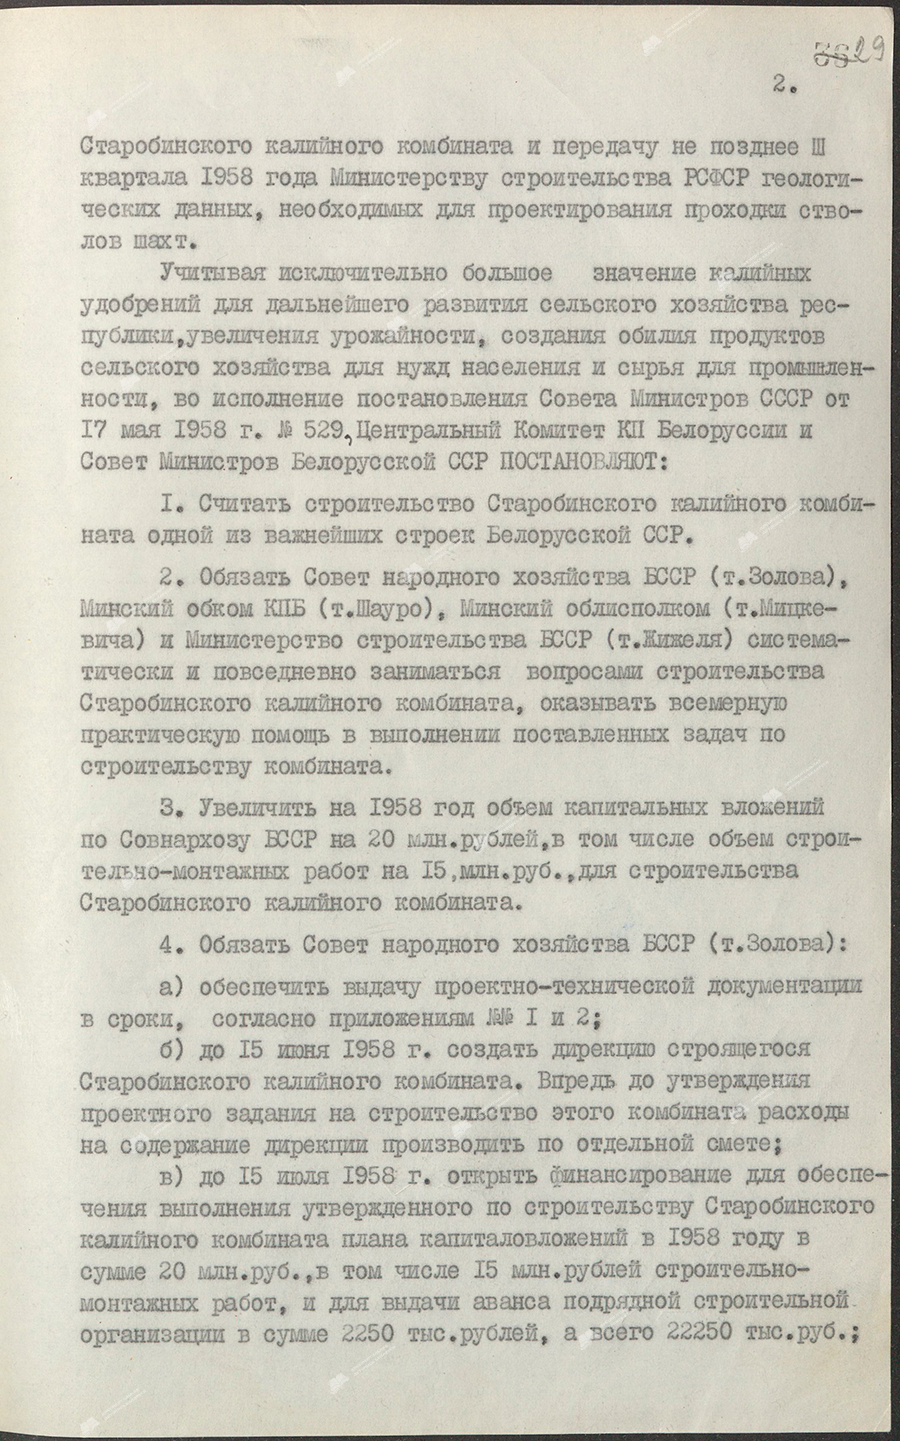 Resolution No. 368 of the Central Committee of the Communist Party of Belarus and the Council of Ministers of the BSSR «On the construction of the Starobinsky Potash Plant»-с. 1